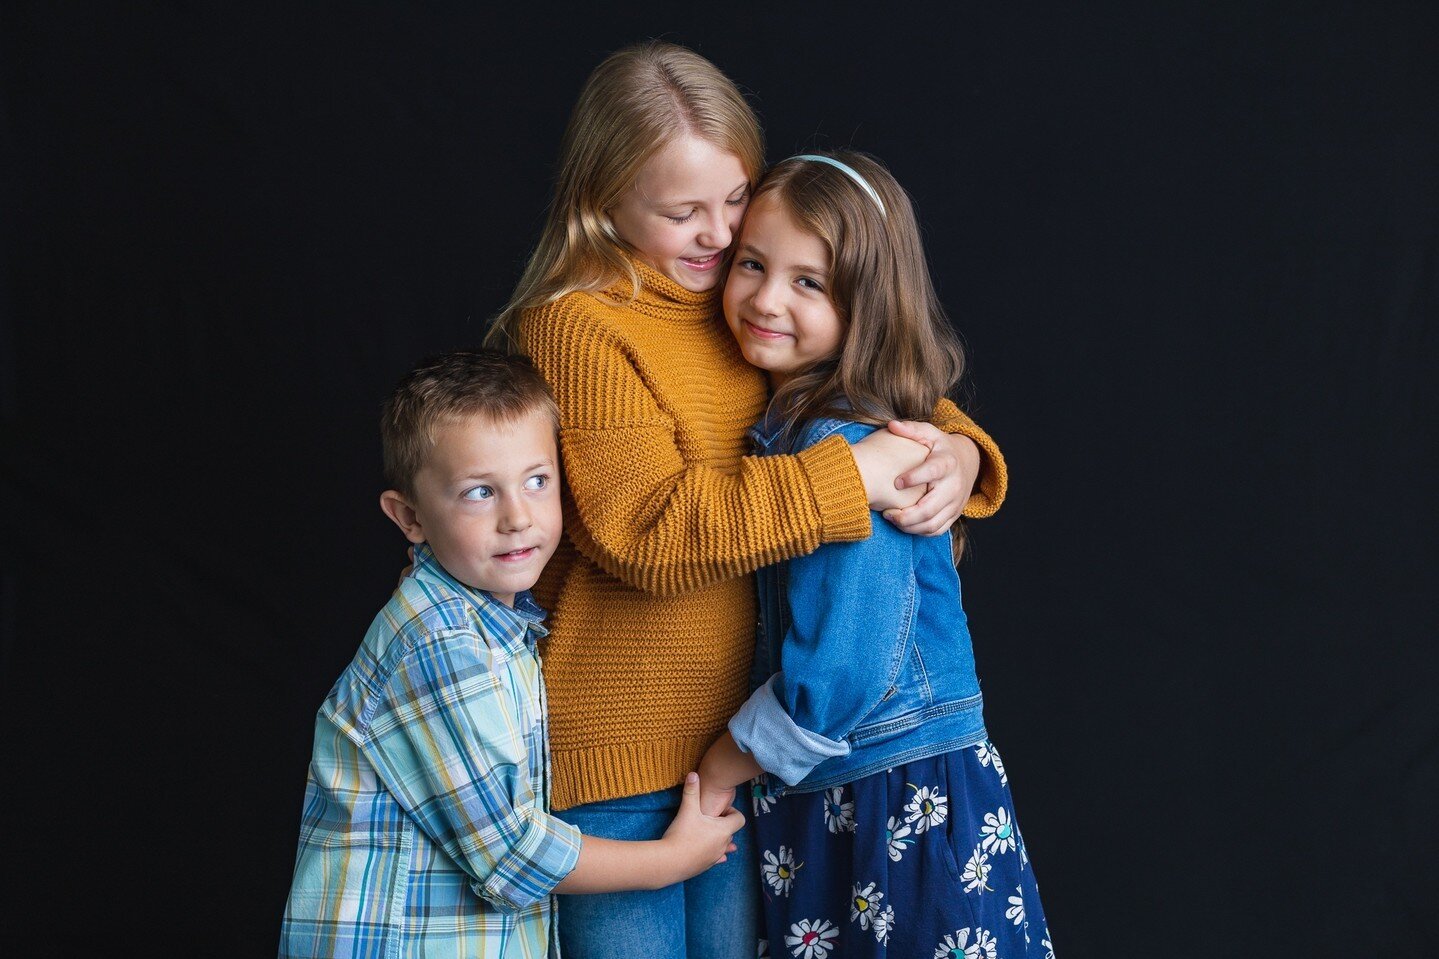 One of my favorite things about holding Better Than School Portraits mini sessions year after year is watching your kids grow. ⁠
⁠
It's an honor to see children multiple years in a row in front of my lens. Each time there is something familiar about 